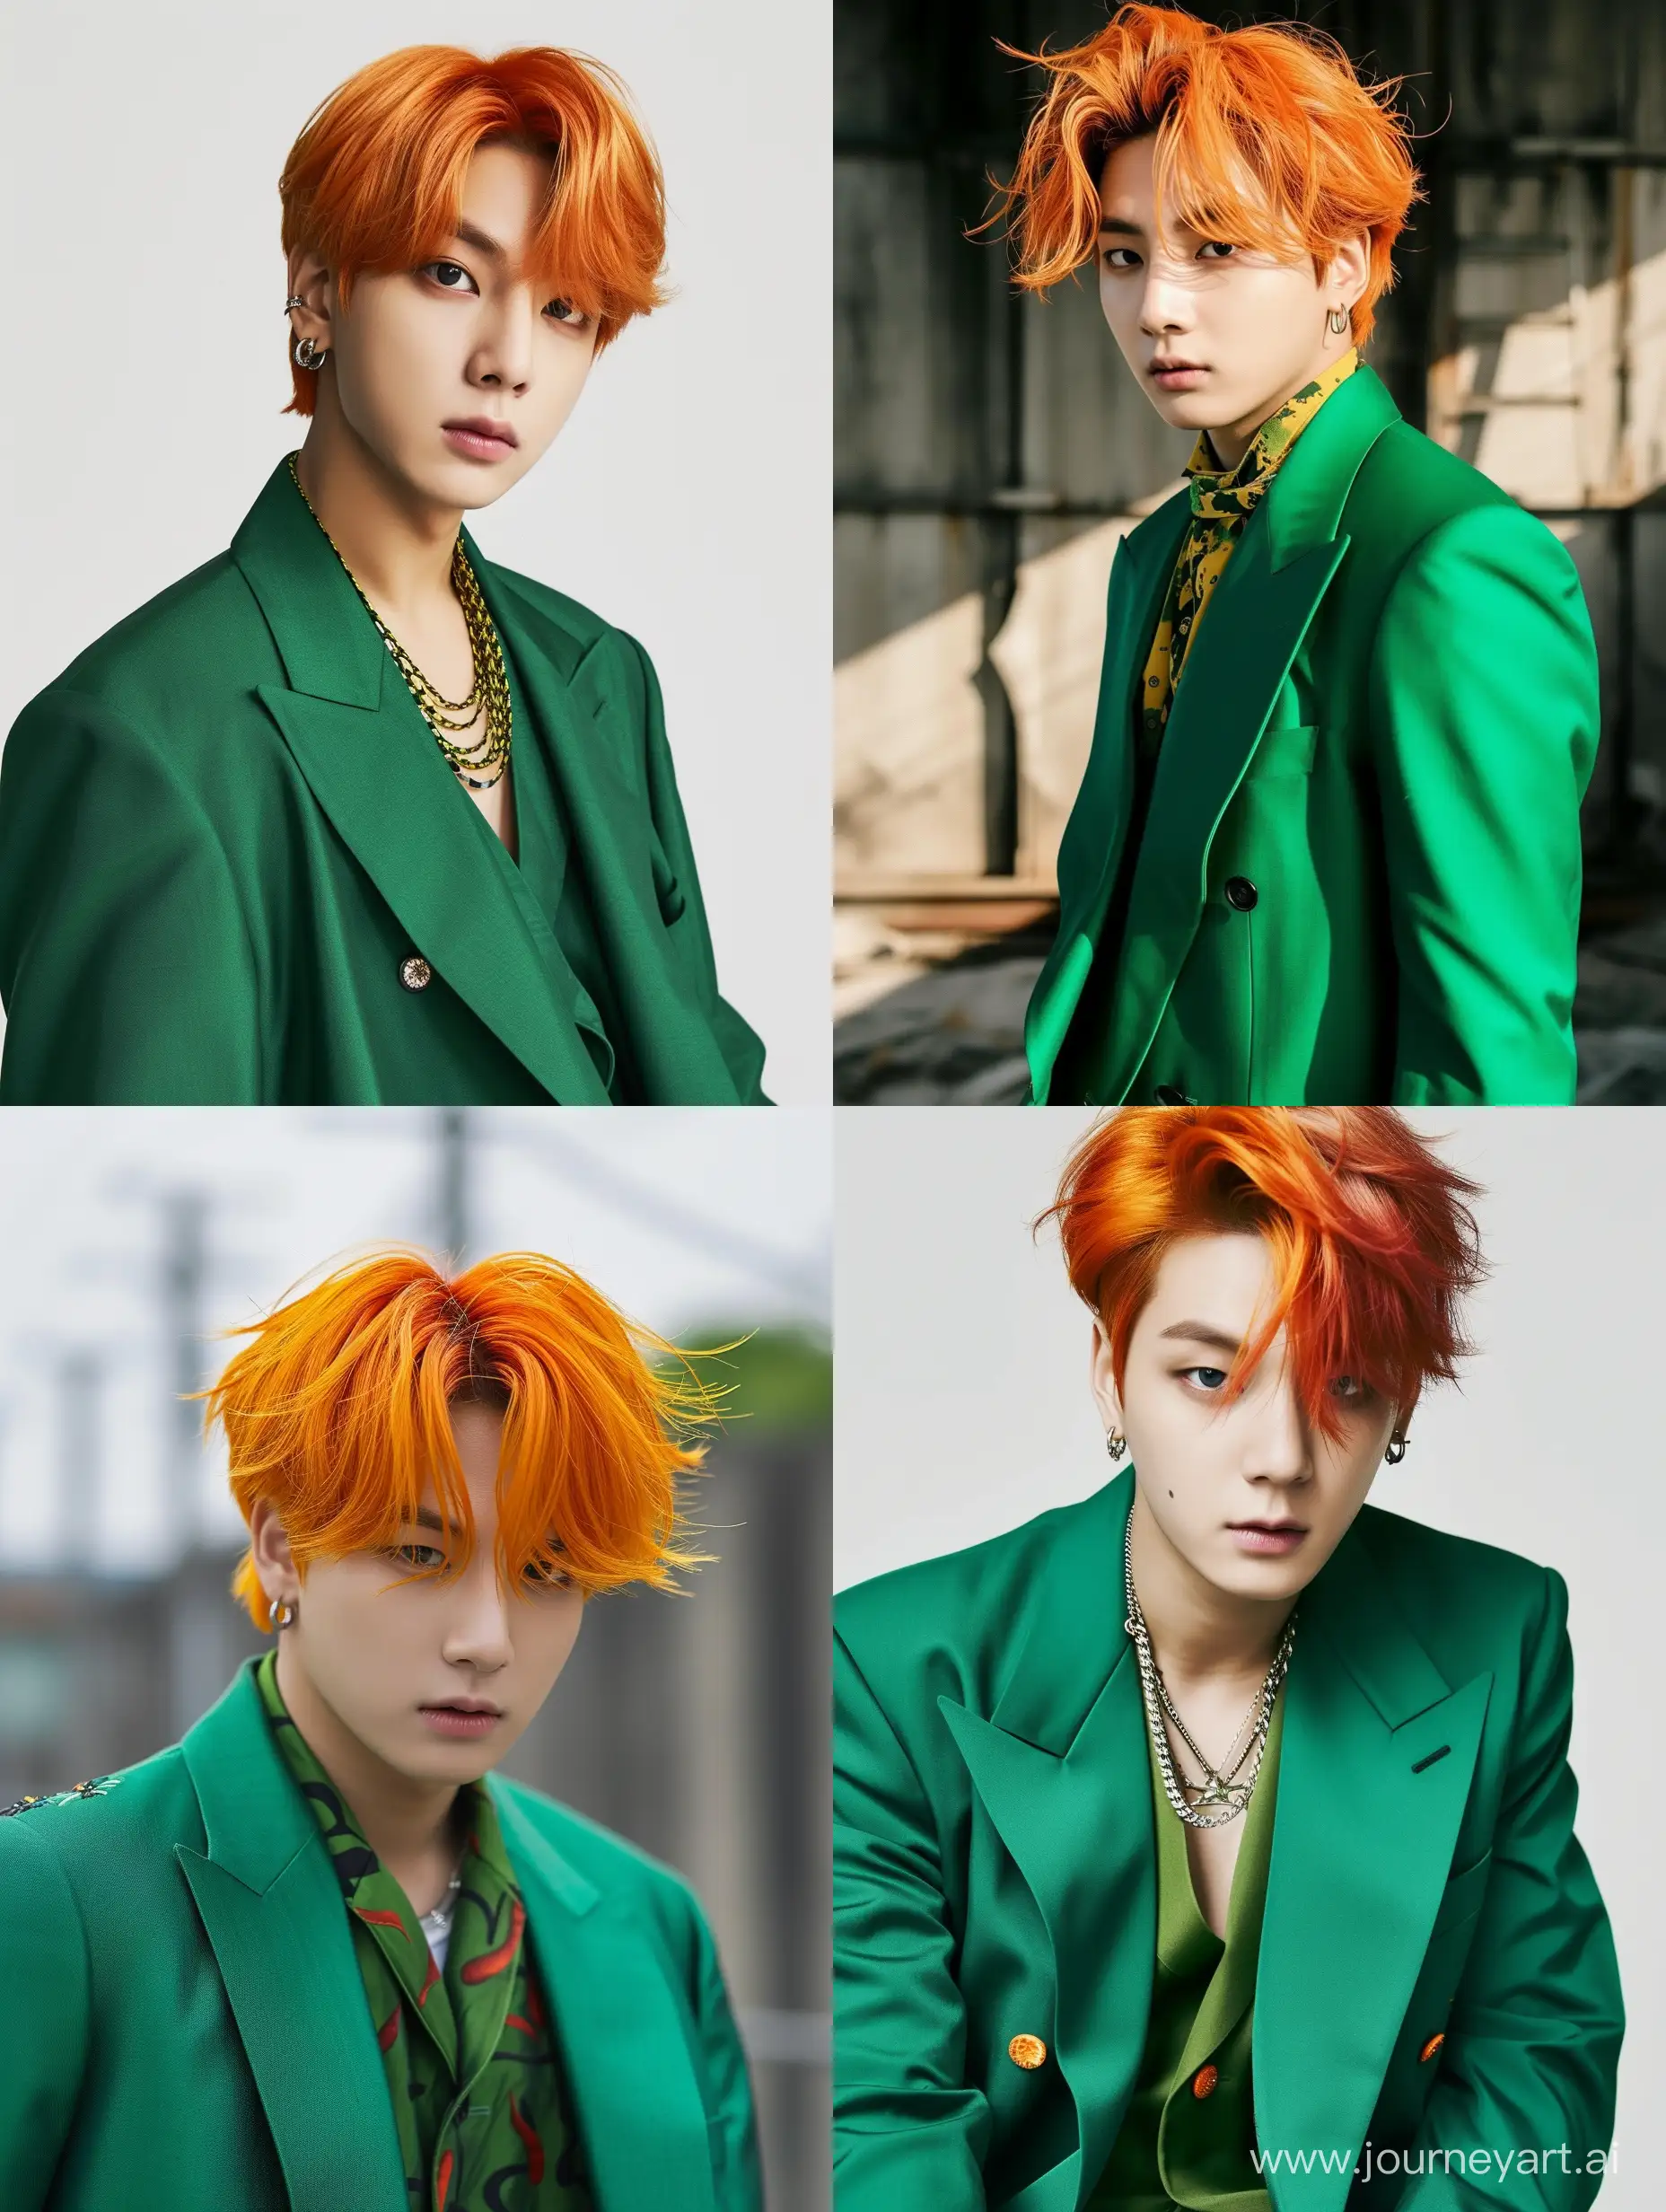 BTS-Jungkook-Stuns-in-Vibrant-Green-Suit-with-Intense-Orange-Hair